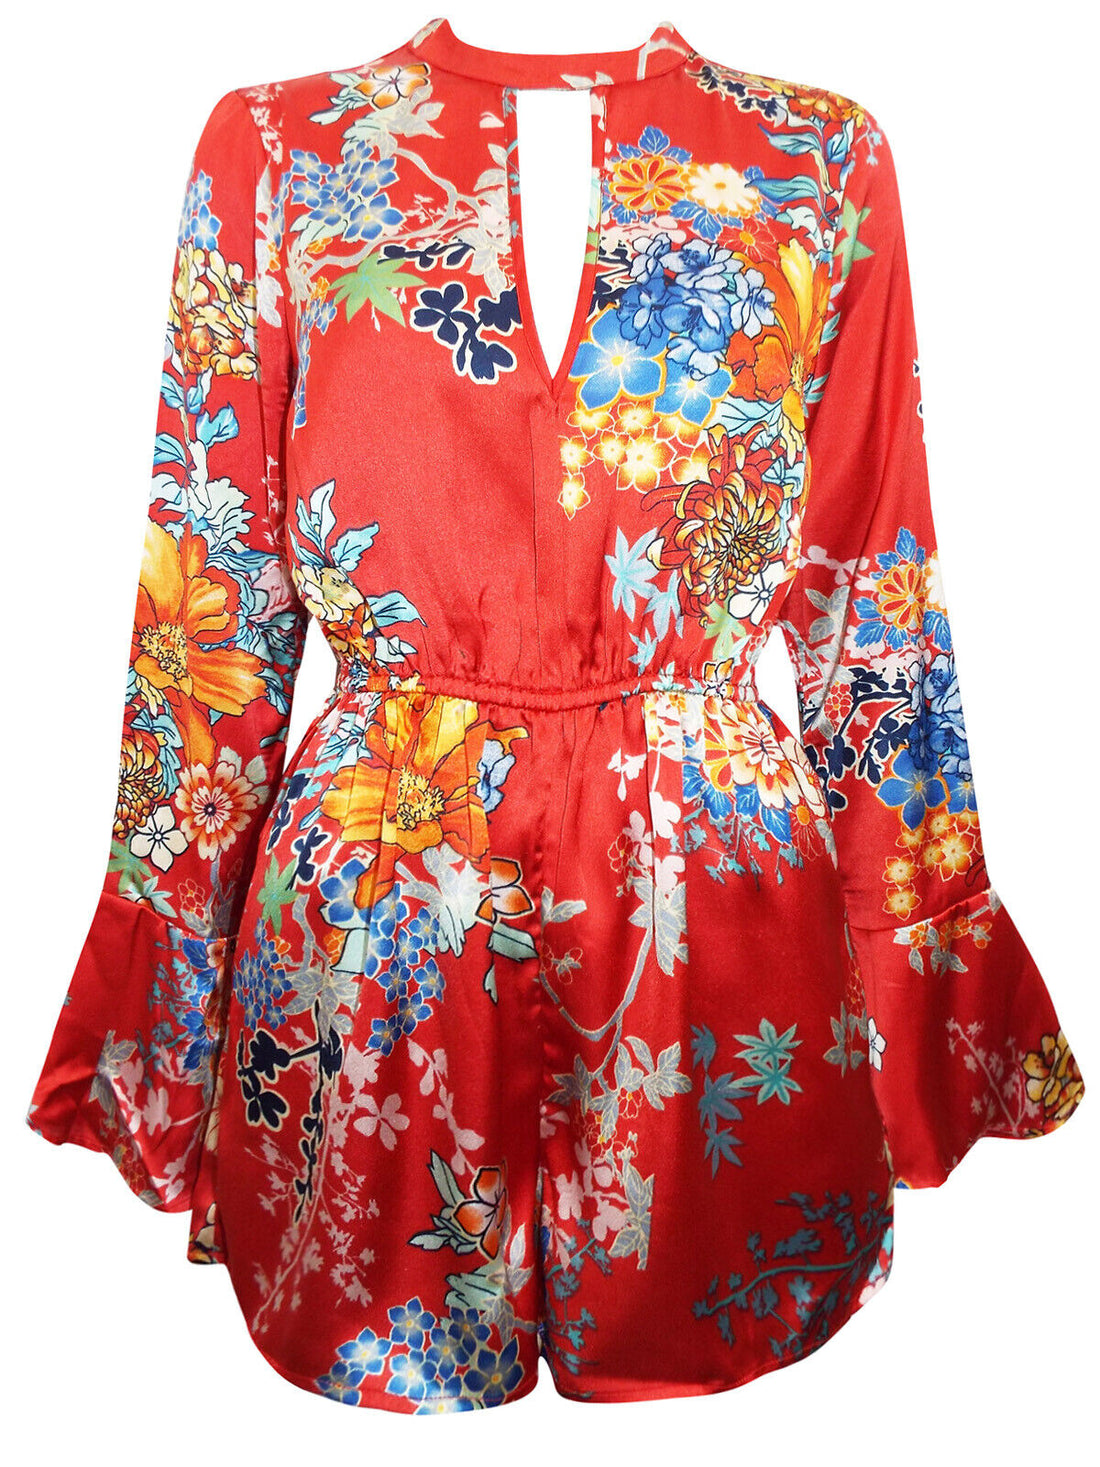 EX Boohoo Red Oriental Floral Print Satin Playsuit in Sizes 6 or 8